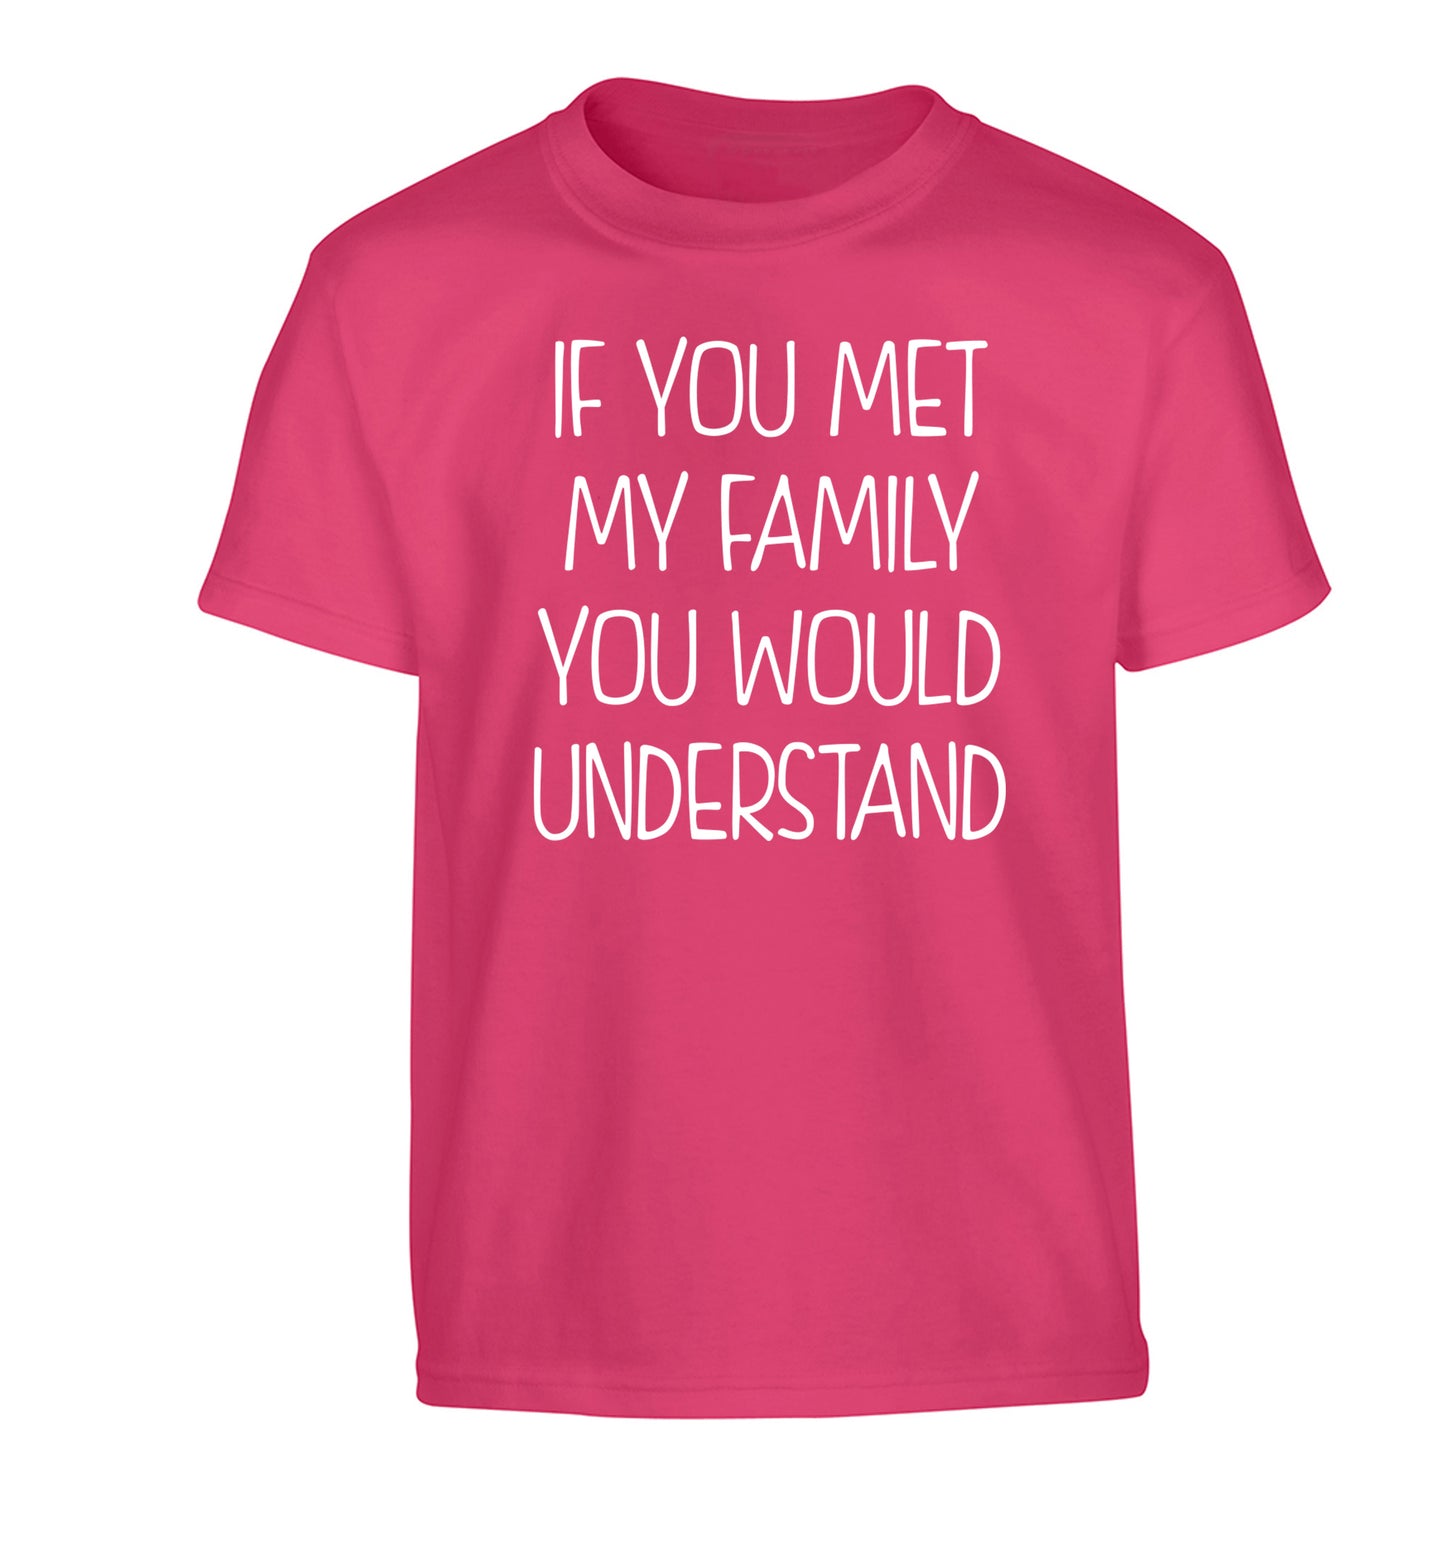 If you met my family you would understand Children's pink Tshirt 12-13 Years